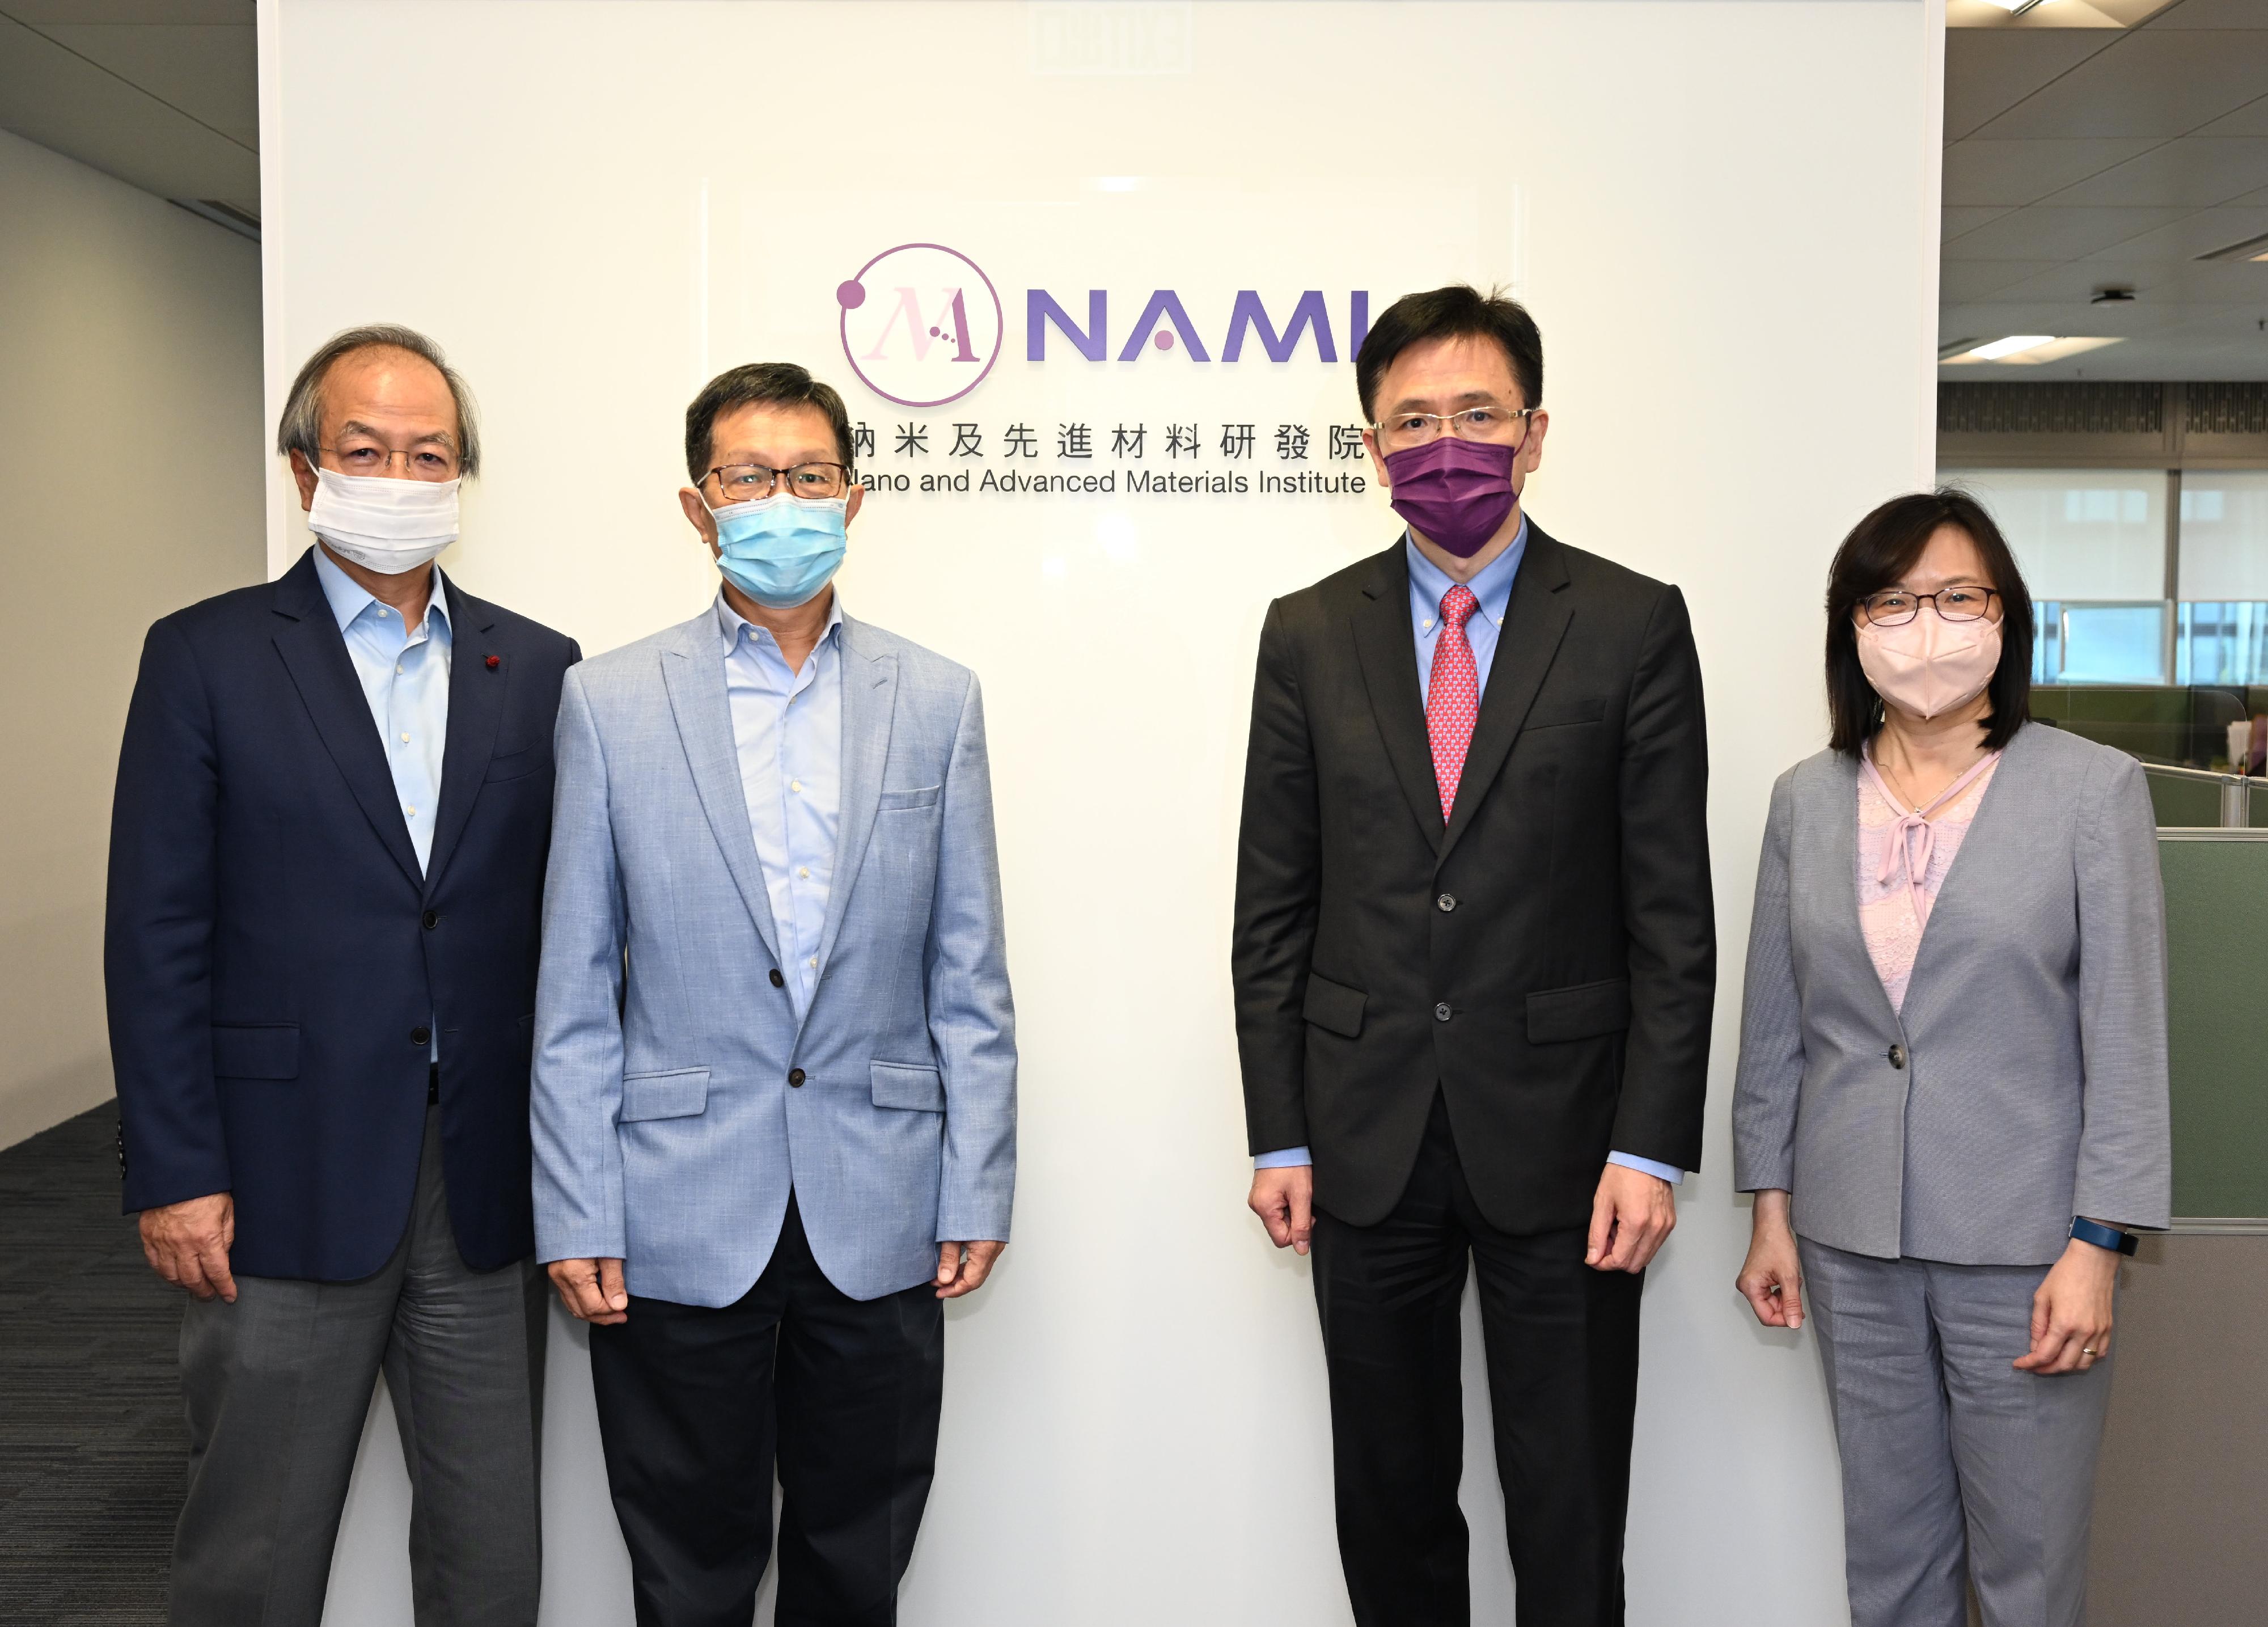 The Secretary for Innovation, Technology and Industry, Professor Sun Dong (second right), accompanied by the Commissioner for Innovation and Technology, Ms Rebecca Pun (first right), visits the Nano and Advanced Materials Institute today (July 13), and is pictured with the Chairman, Professor Ching Pak-chung (second left), and the Chief Executive Officer of the NAMI, Mr Daniel Yu (first left).